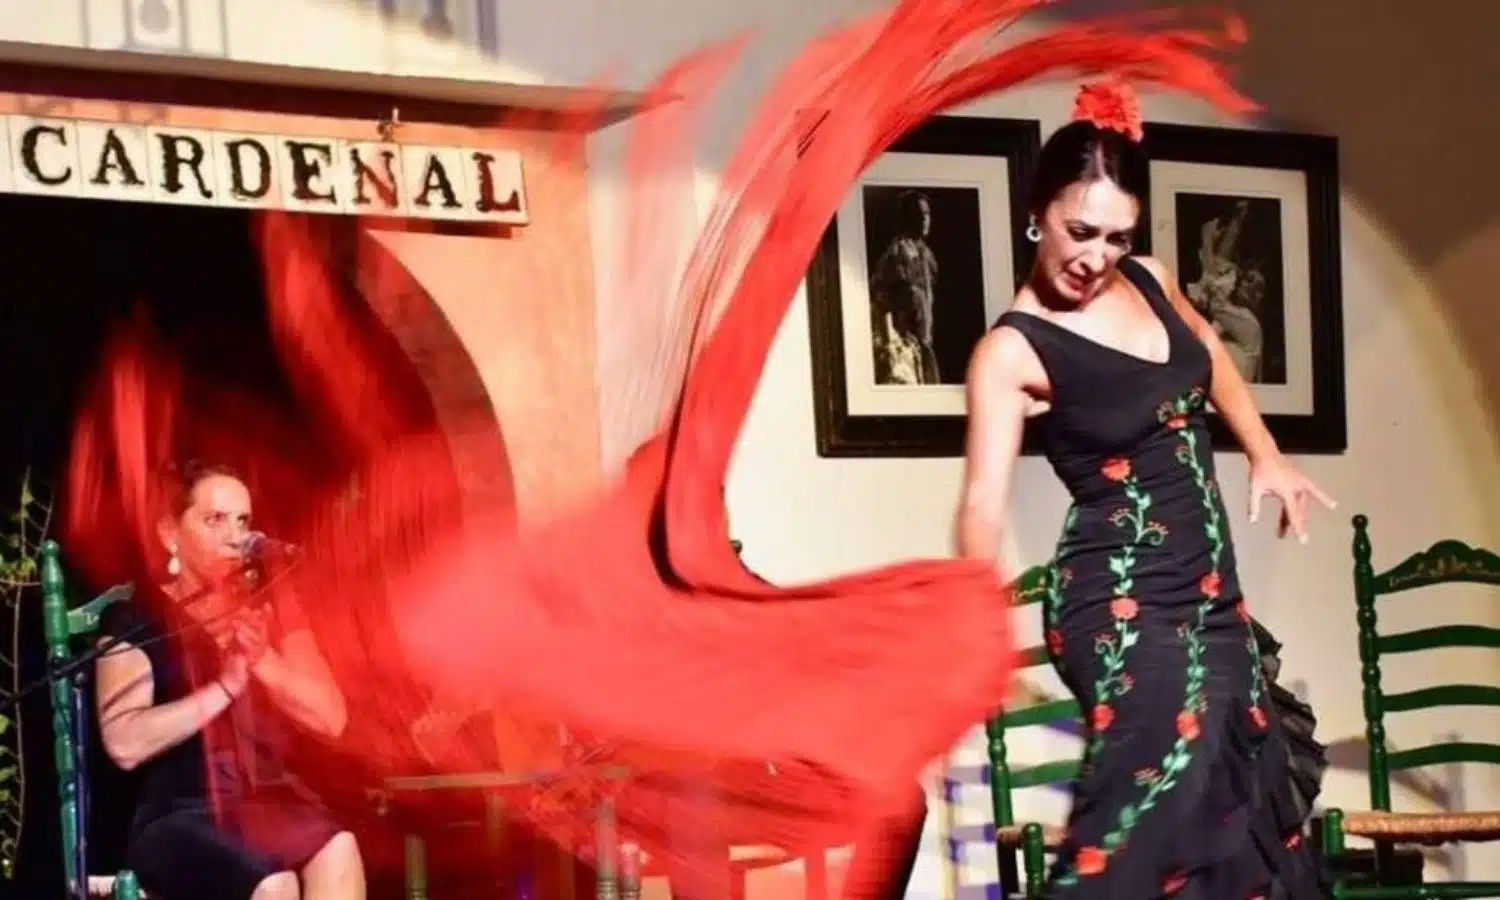 lady in black decorative dress dancing flamenco with a red scarf